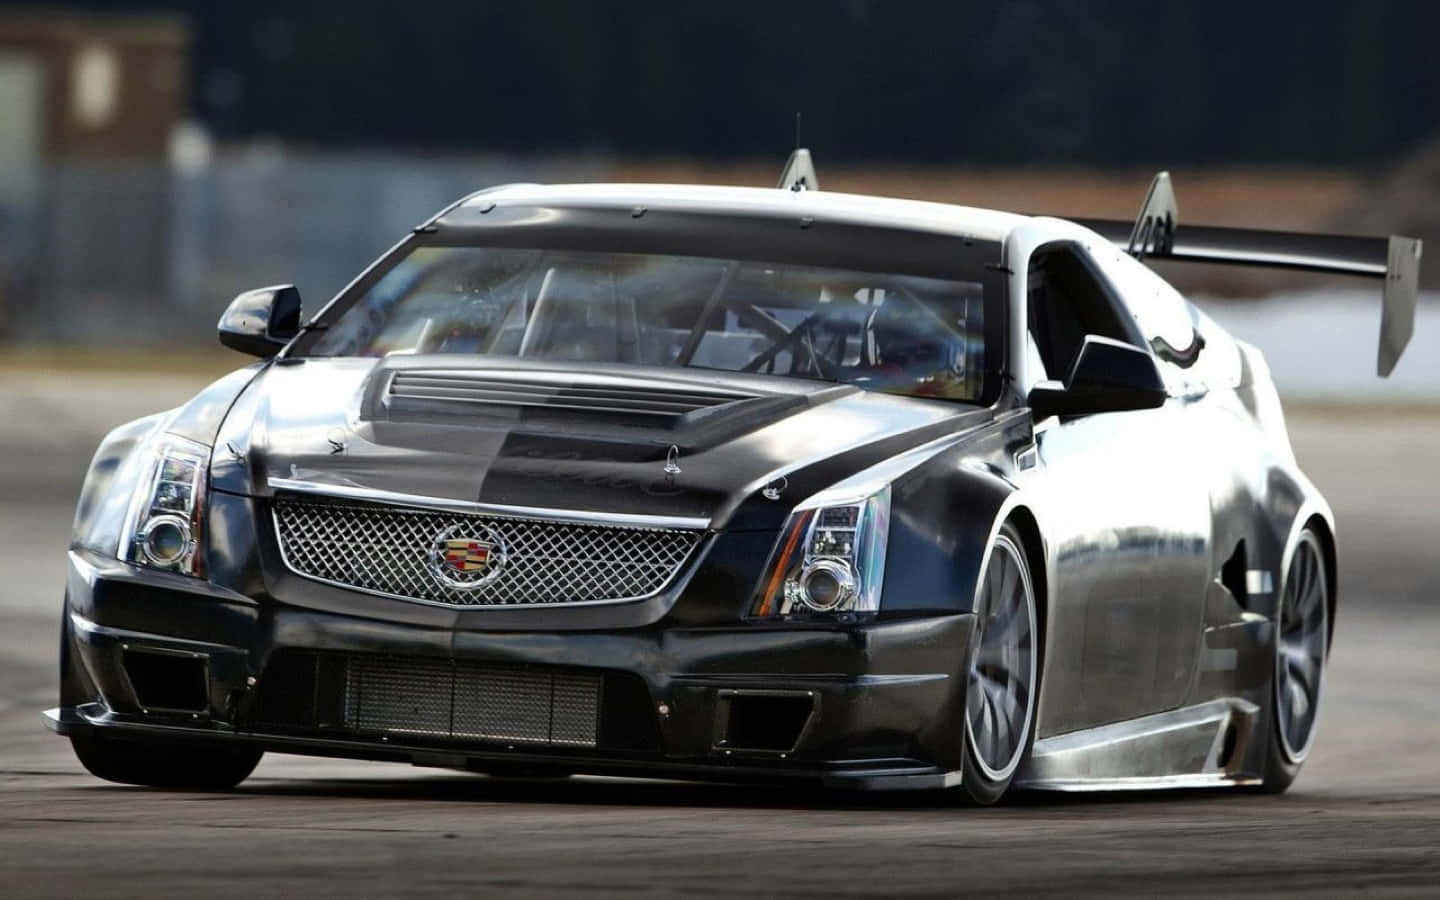 Sleek and Classy Cadillac CTS on the Road Wallpaper